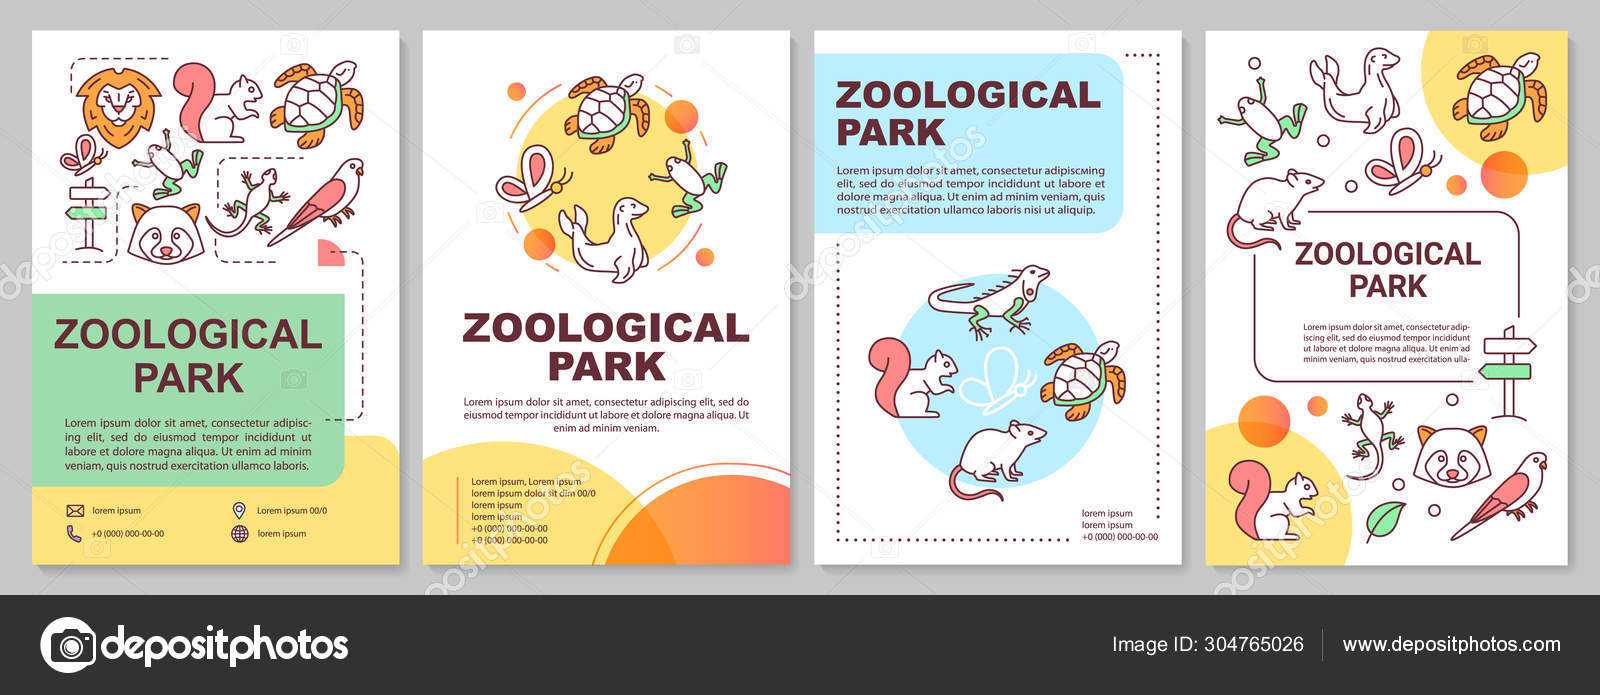 Zoological Park Brochure Template Layout. Zoo Animals. Flyer For Zoo Brochure Template